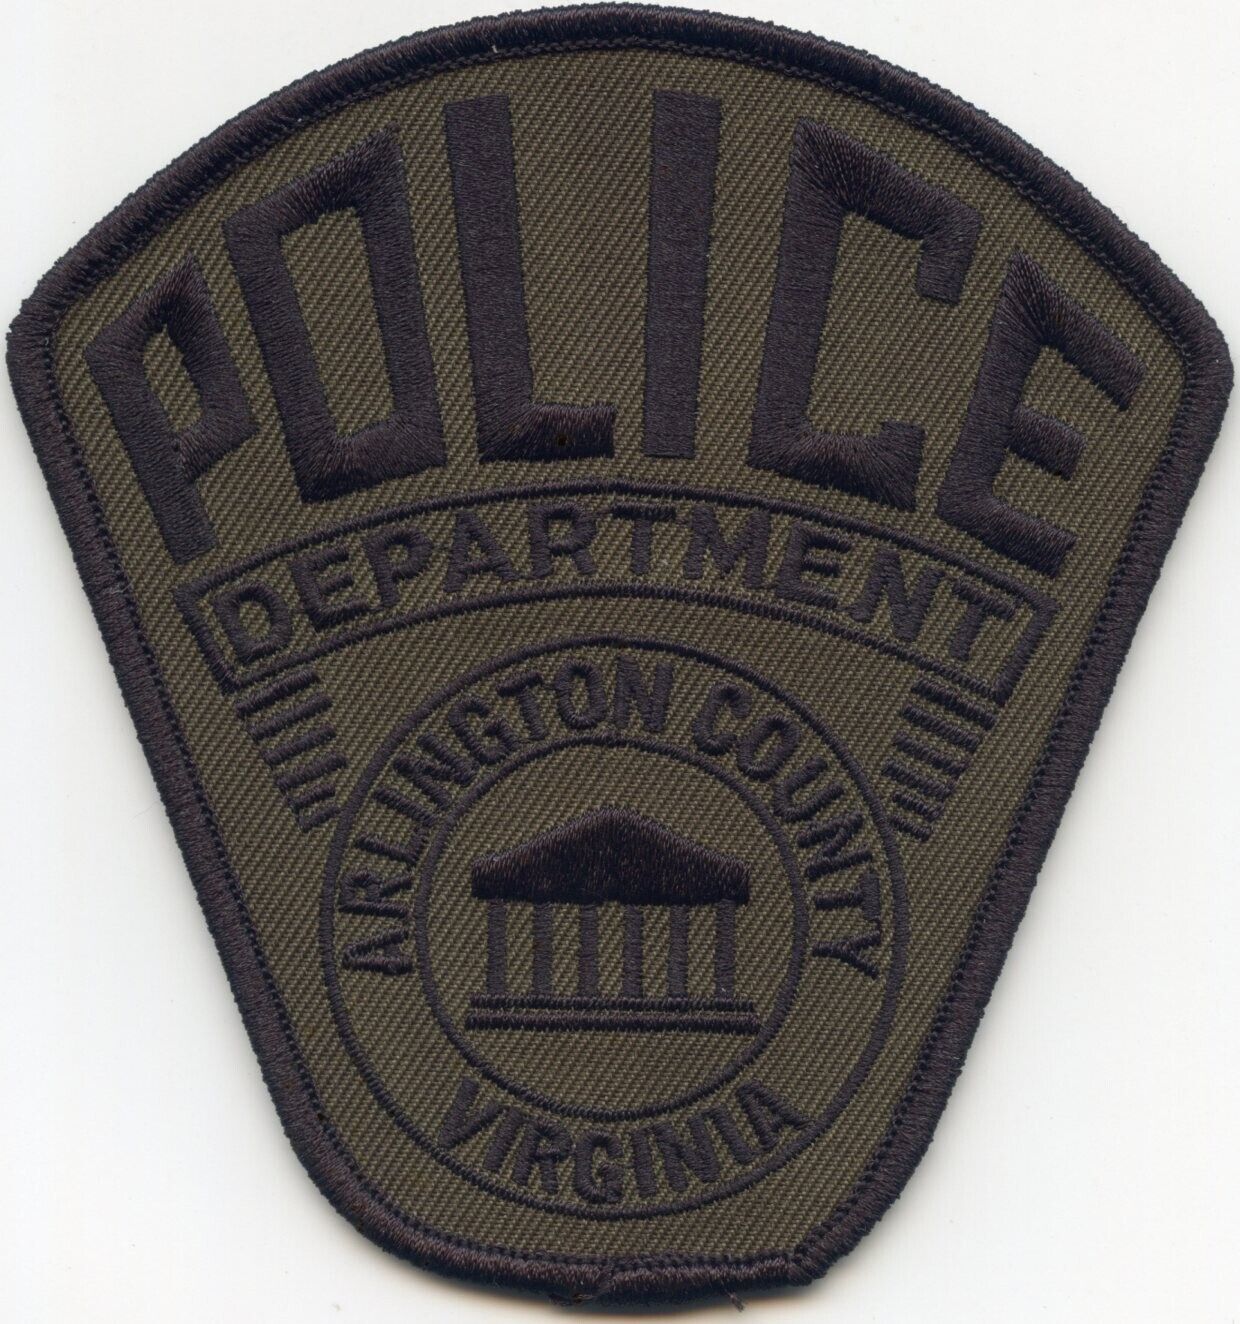 ARLINGTON COUNTY VIRGINIA subdued green POLICE PATCH